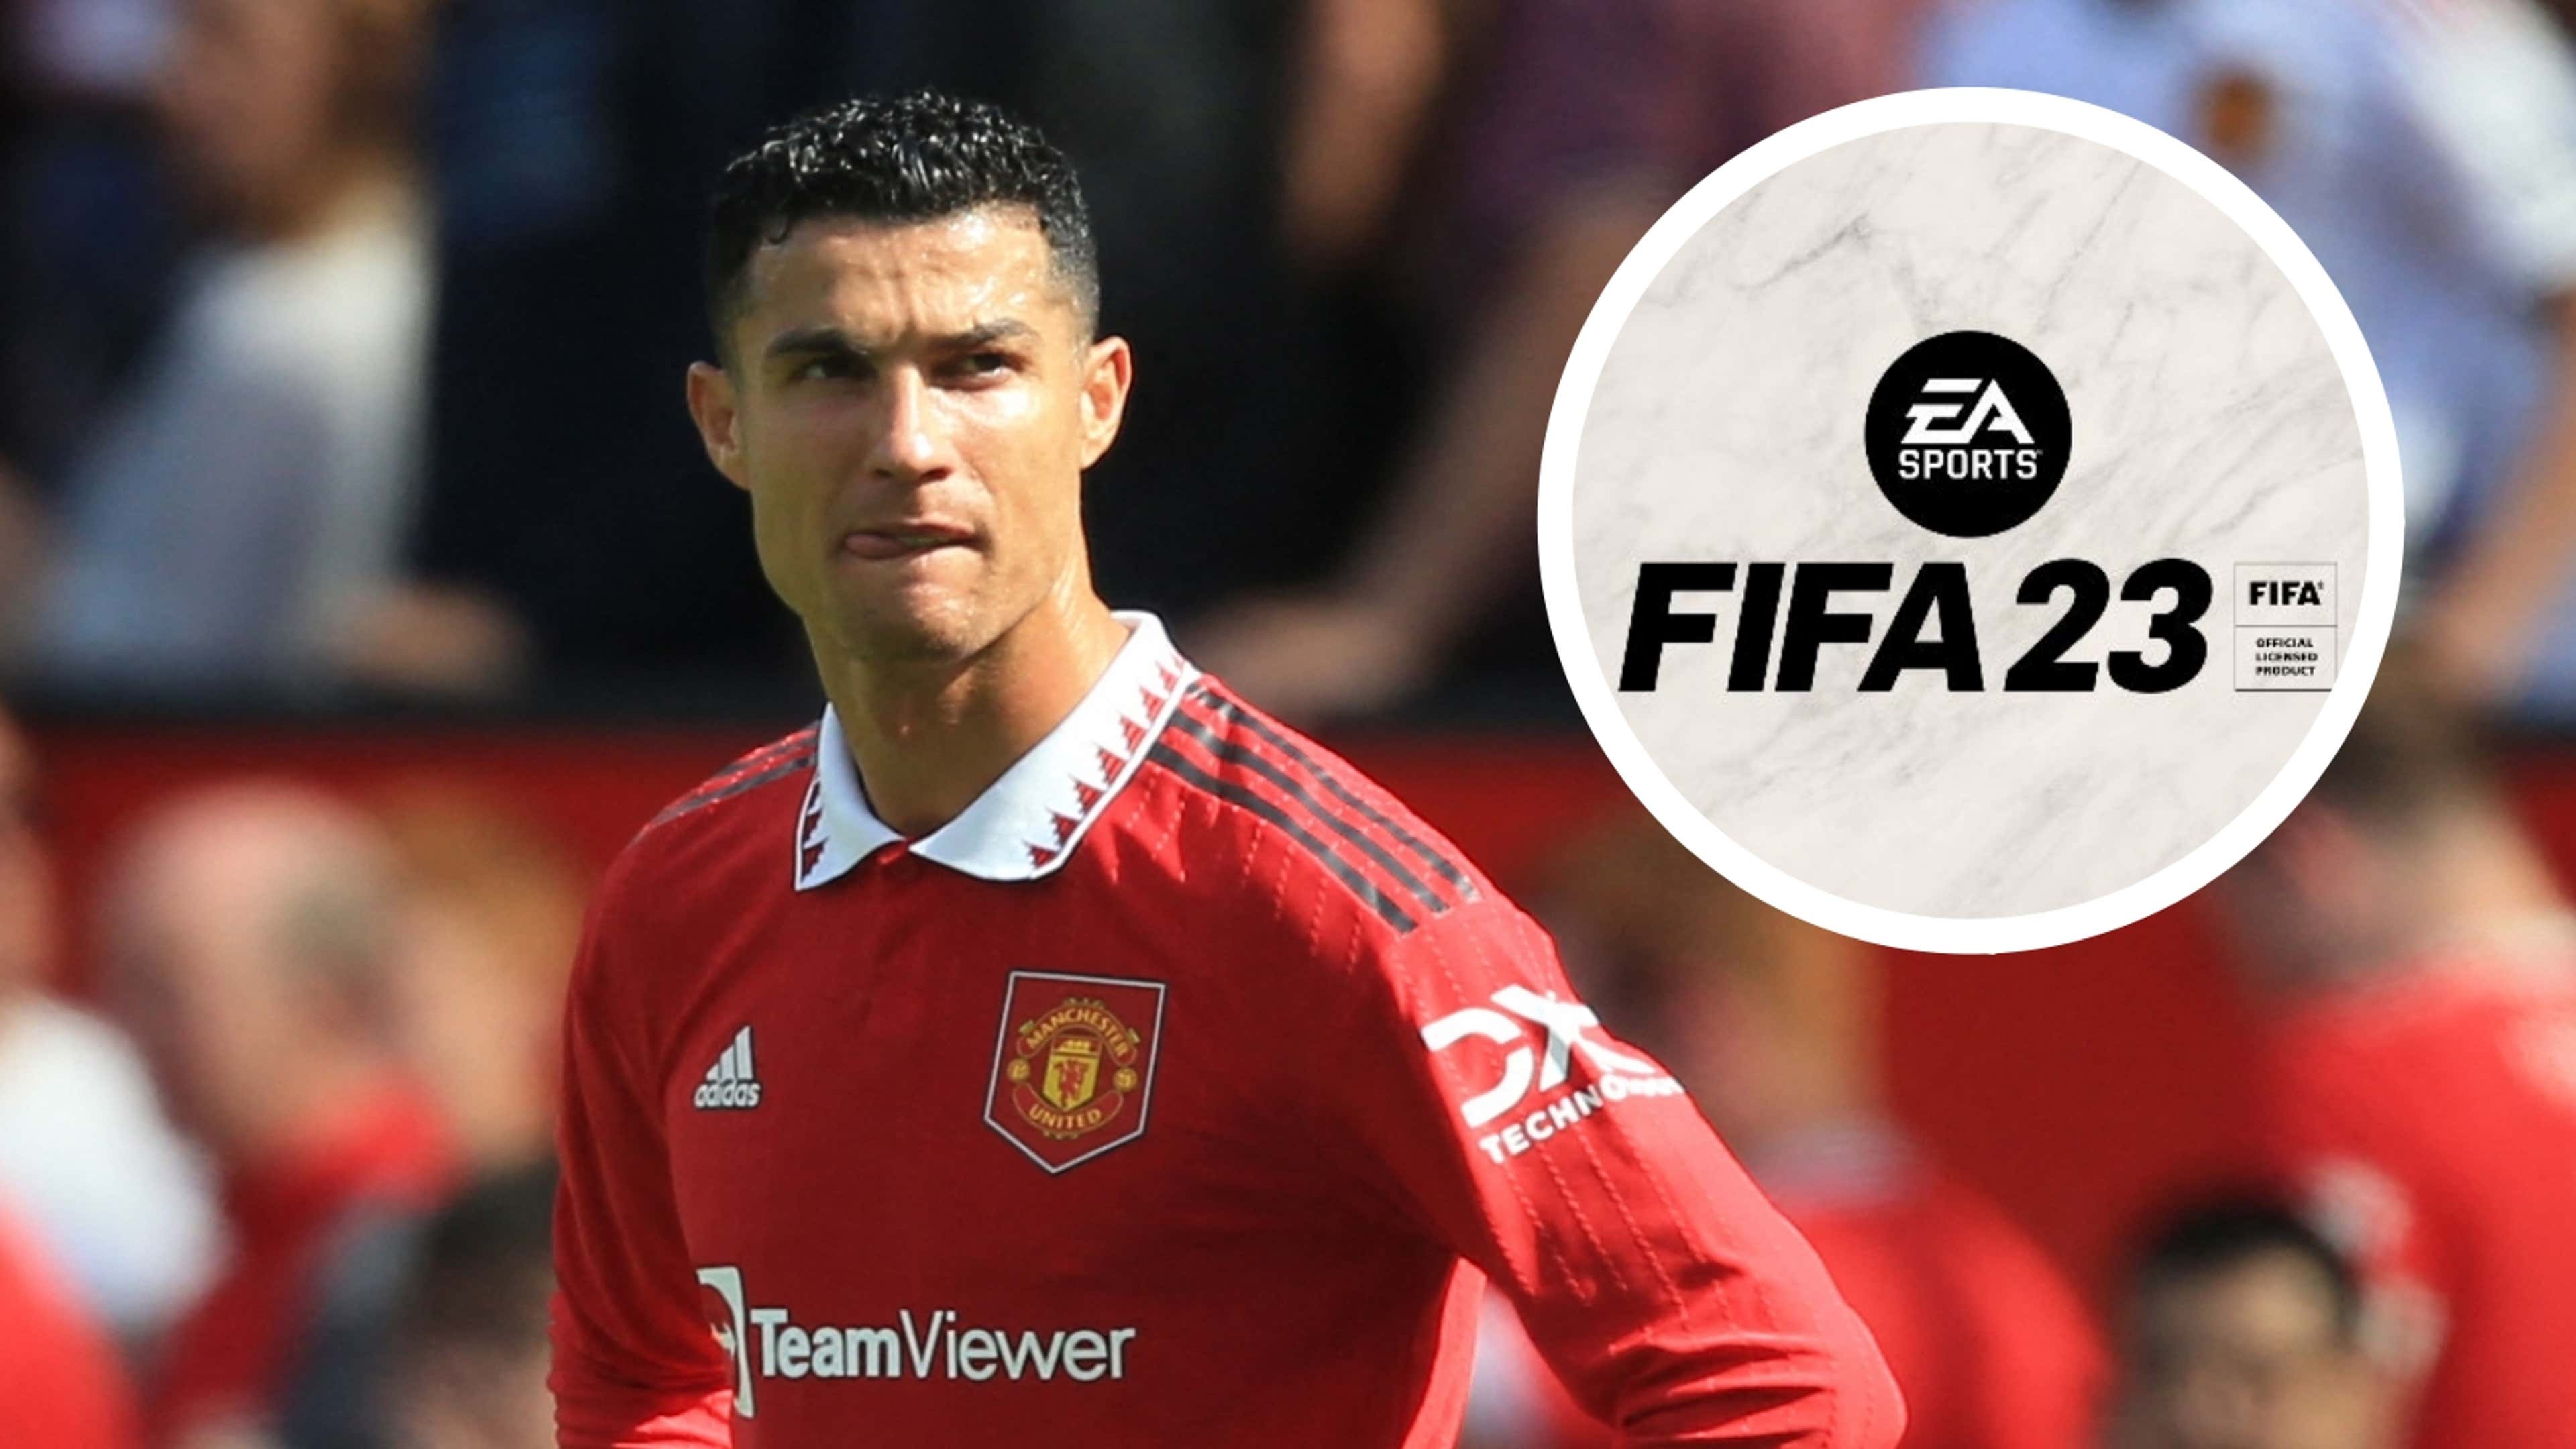 FIFA 19 ratings: Cristiano Ronaldo and Lionel Messi both given 94 overall  rating for first time in history